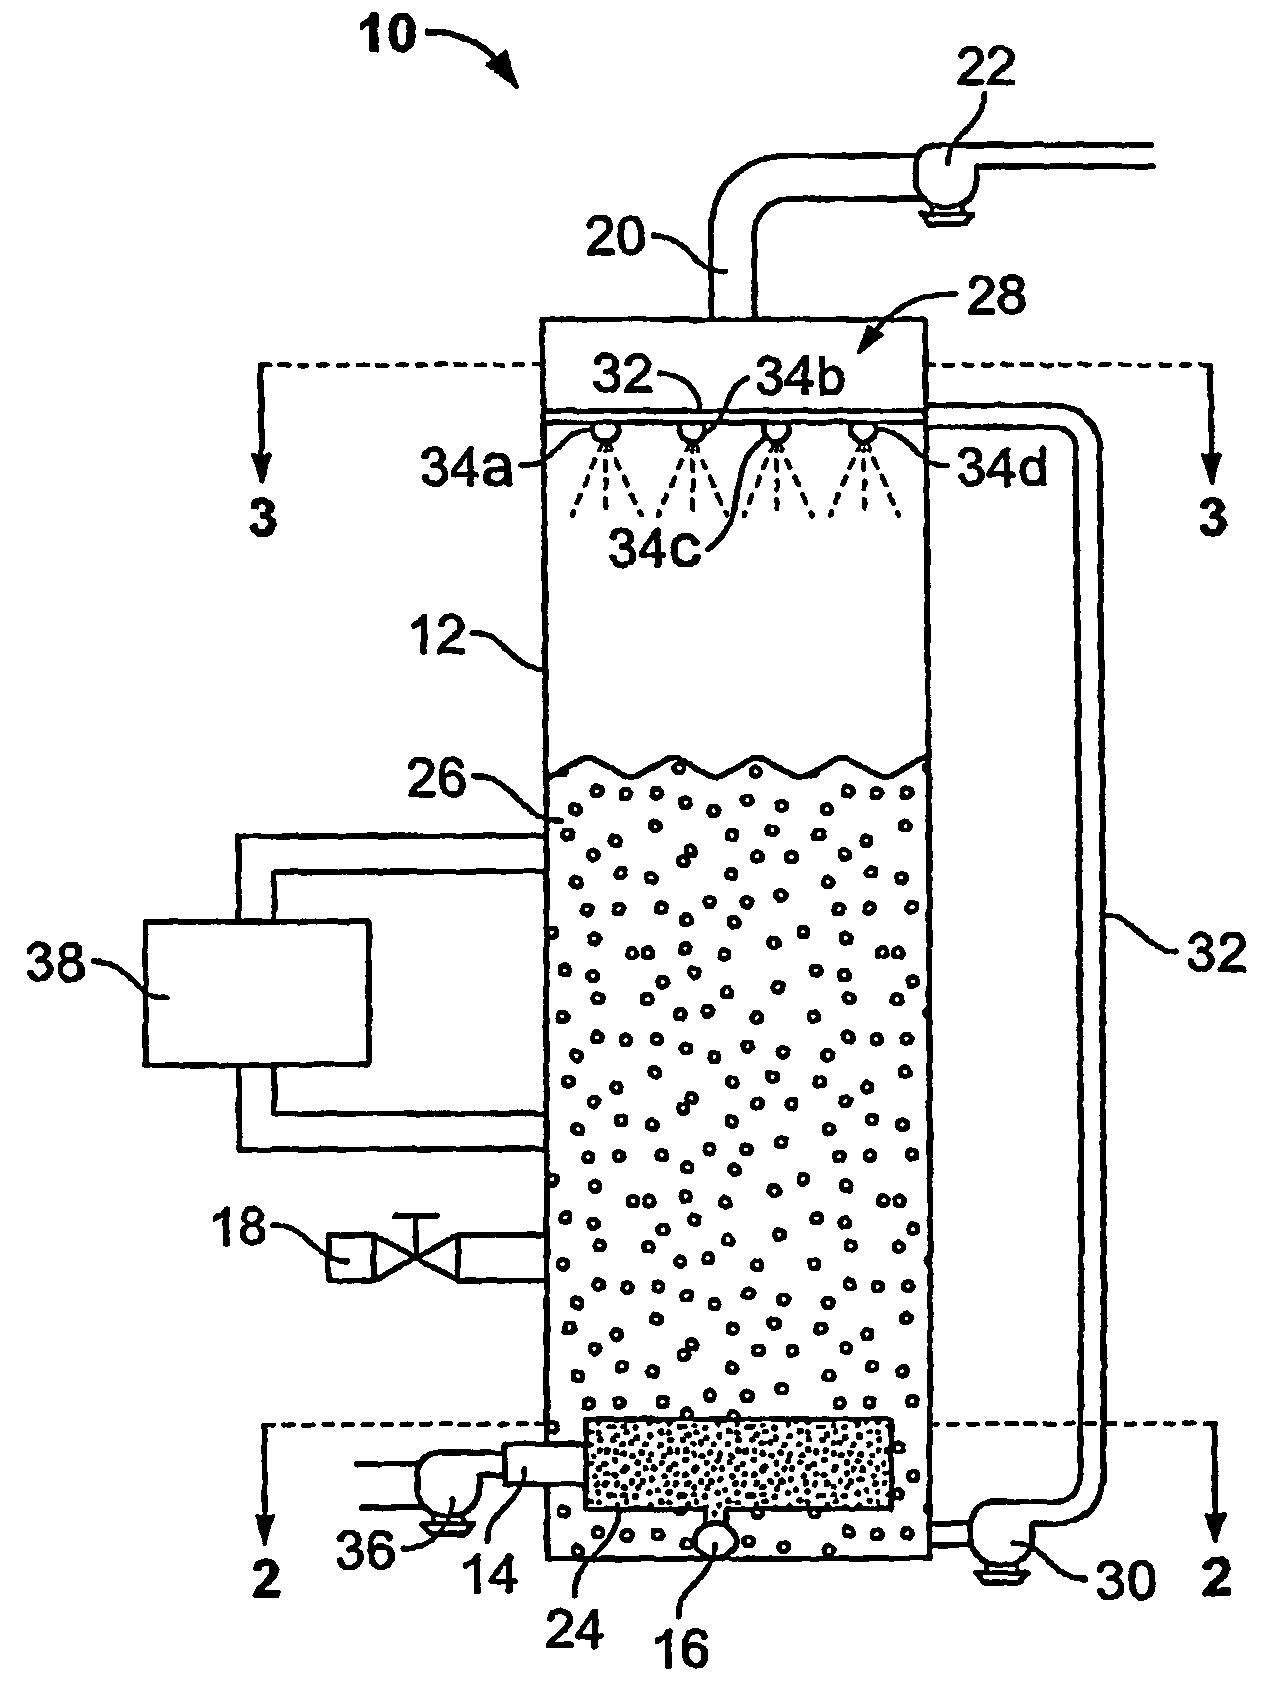 Device for Removing Particulate, Various Acids, and Other Contaminants from Industrial Gases